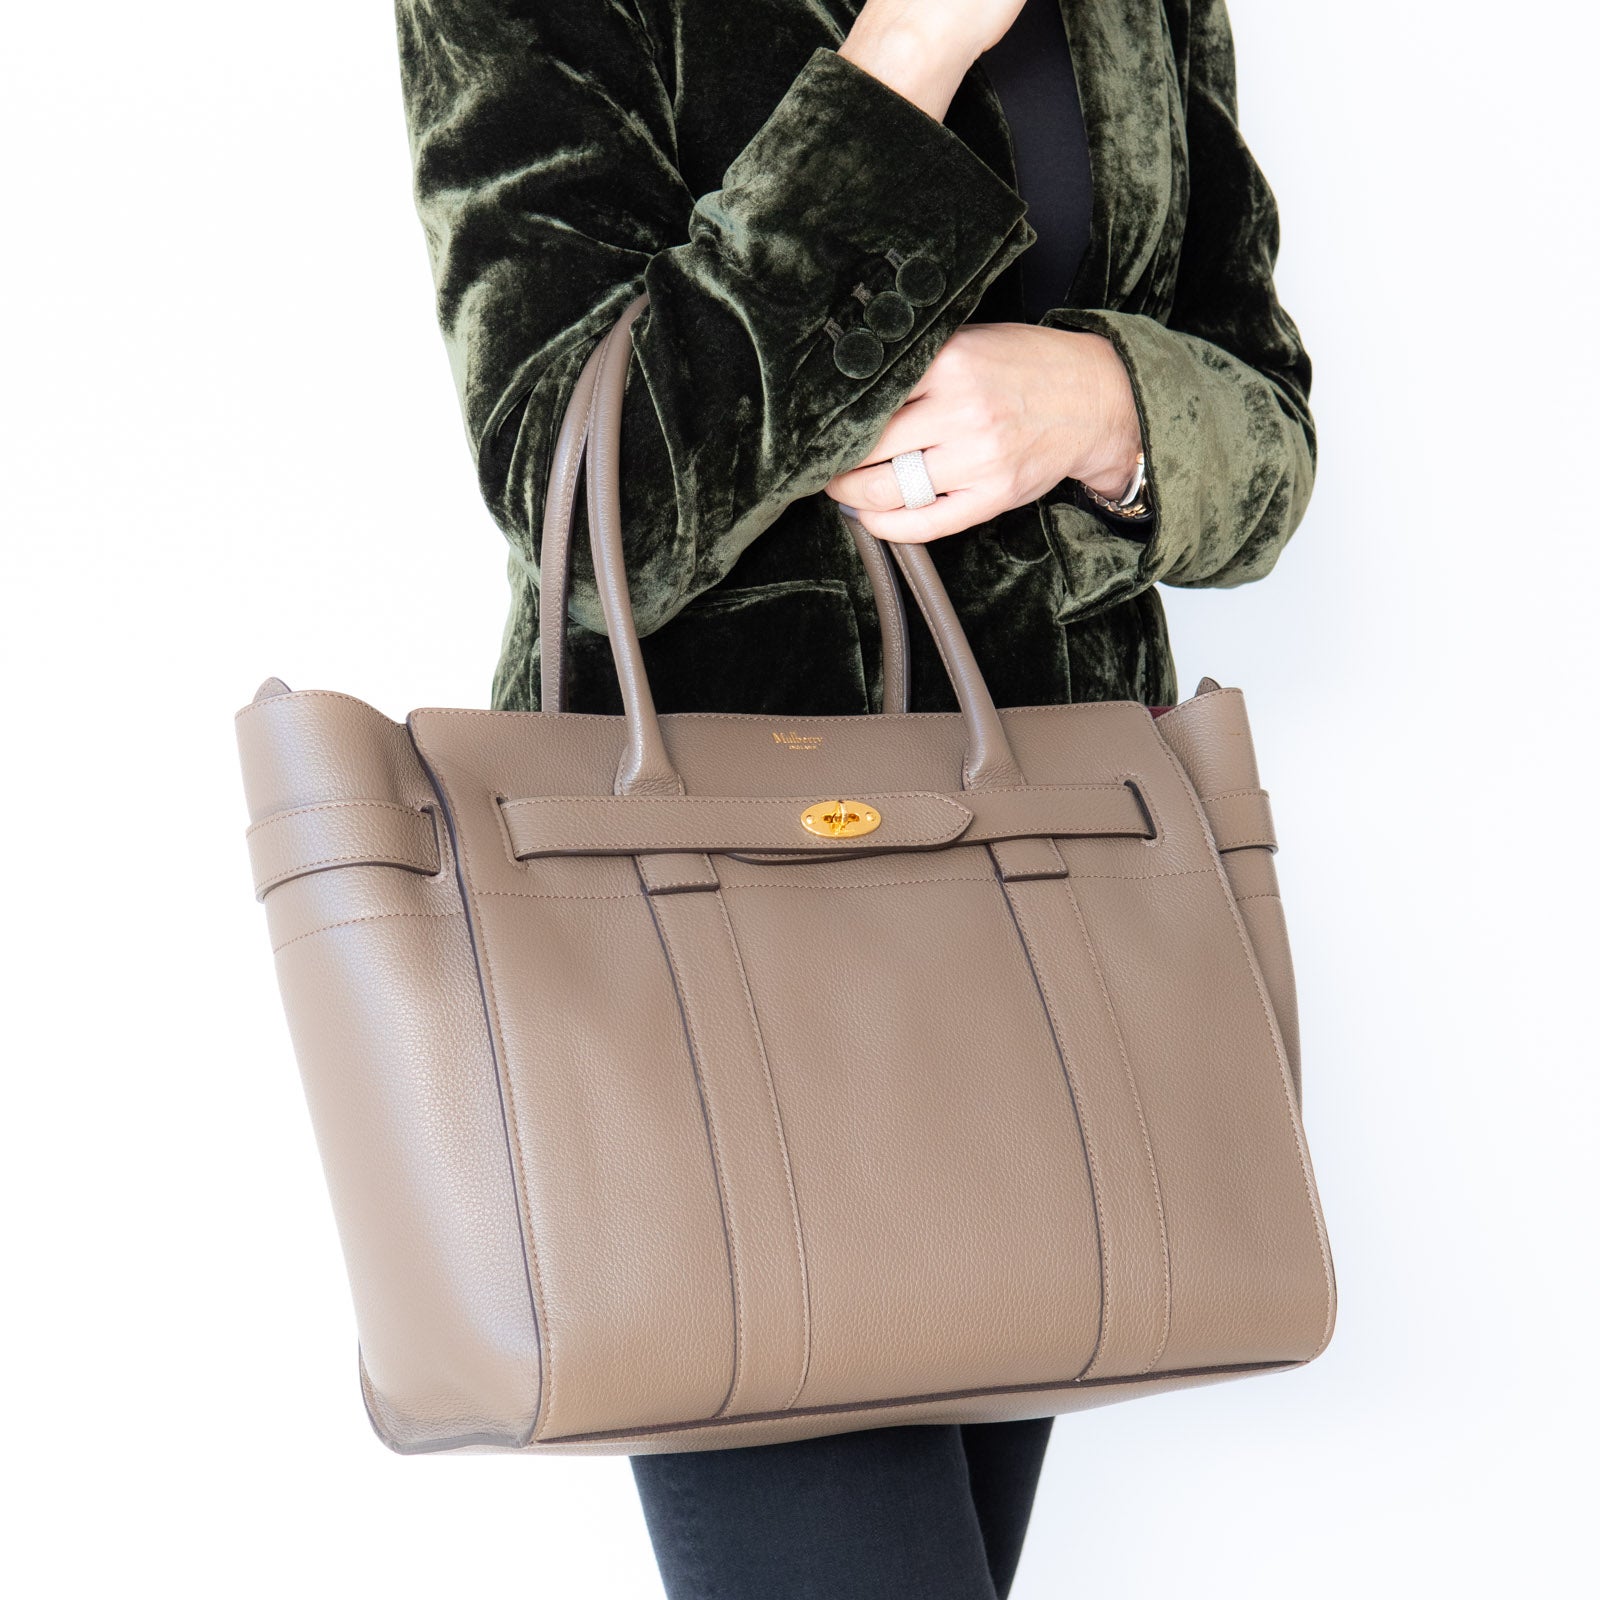 Mulberry Mushroom Zipped Bayswater Leather Bag - Image 7 of 10